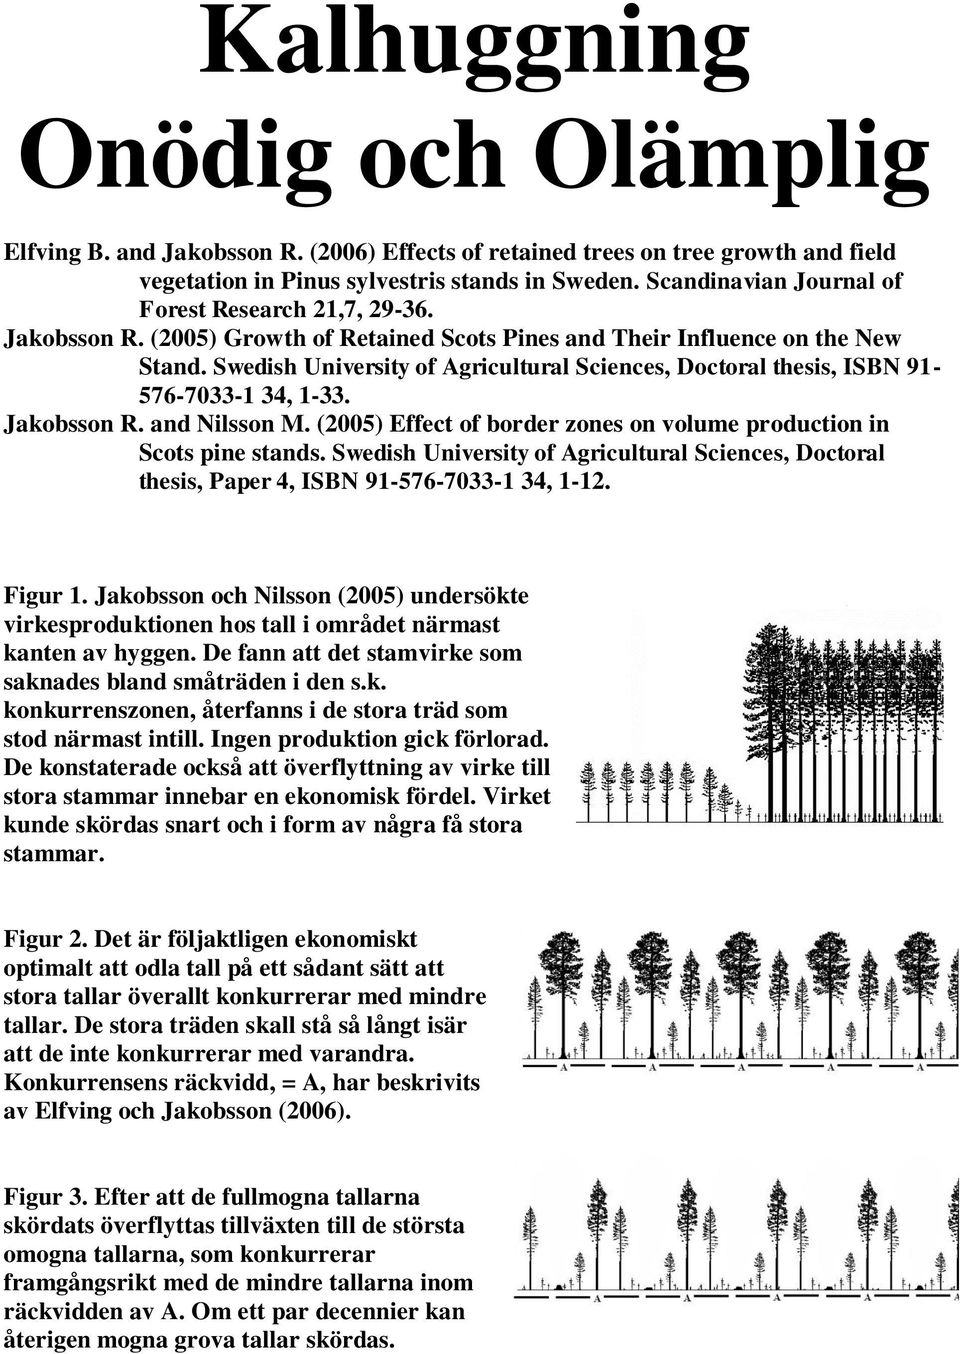 Swedish University of Agricultural Sciences, Doctoral thesis, ISBN 91-576-7033-1 34, 1-33. Jakobsson R. and Nilsson M. (2005) Effect of border zones on volume production in Scots pine stands.